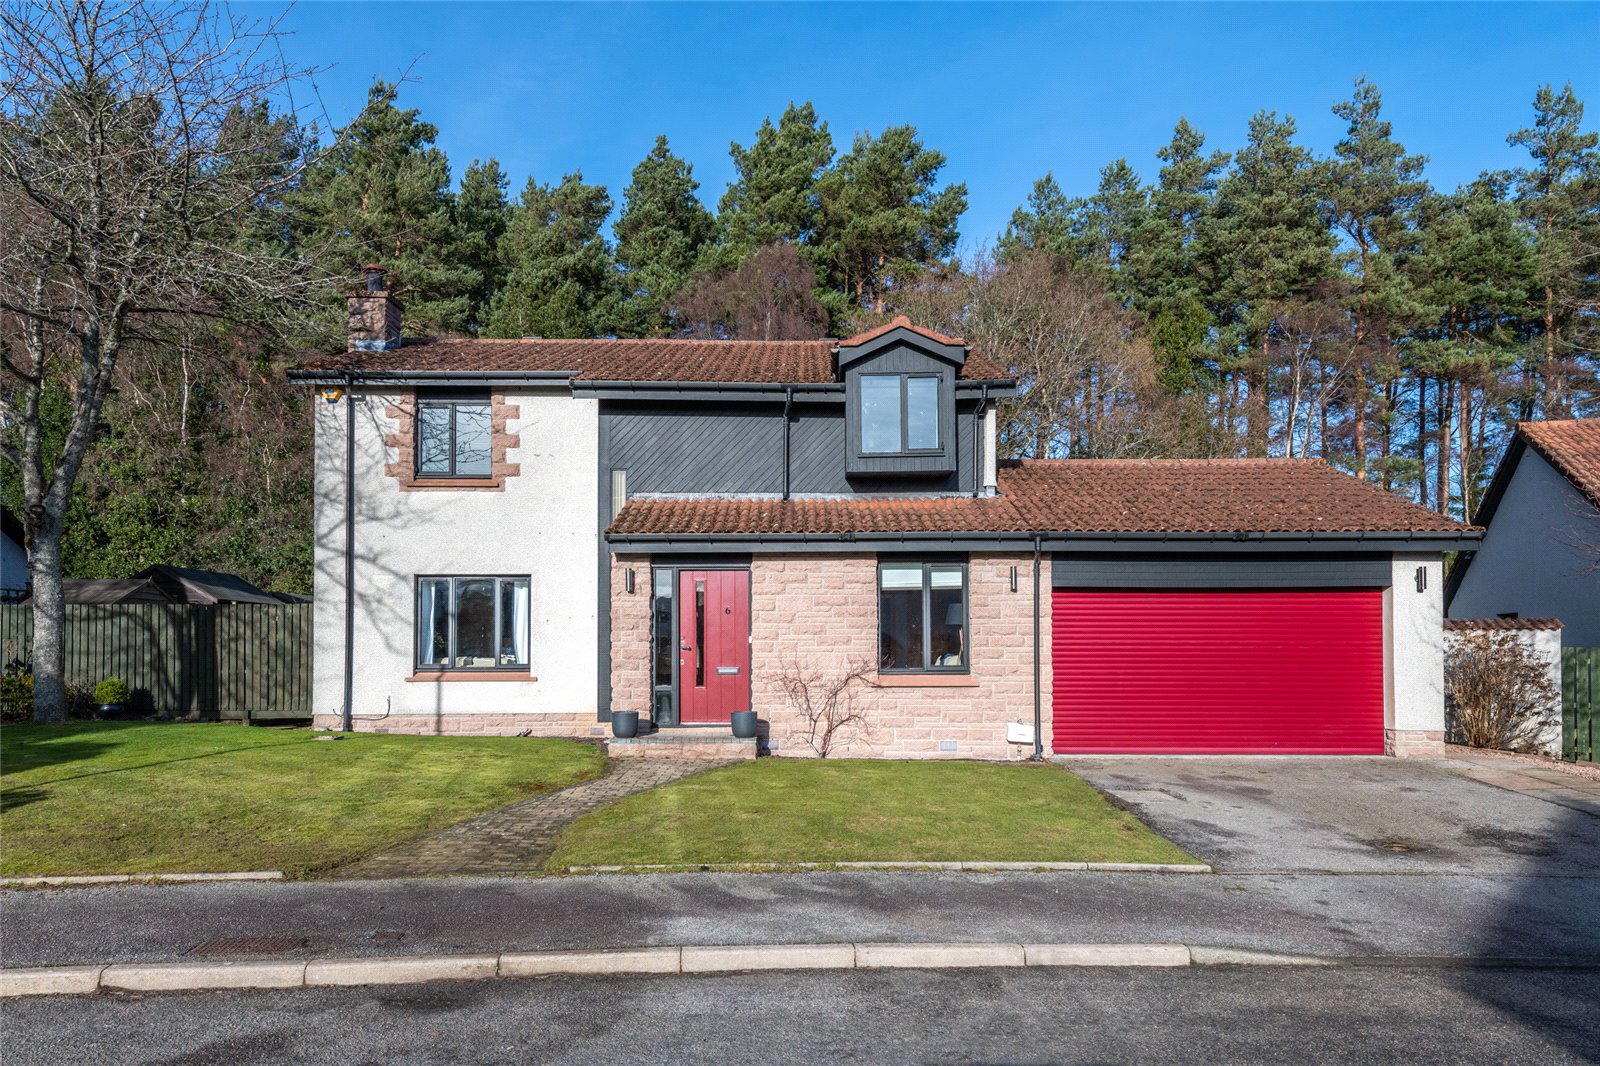 Our latest properties for sale or to let (9th Feb 2023)